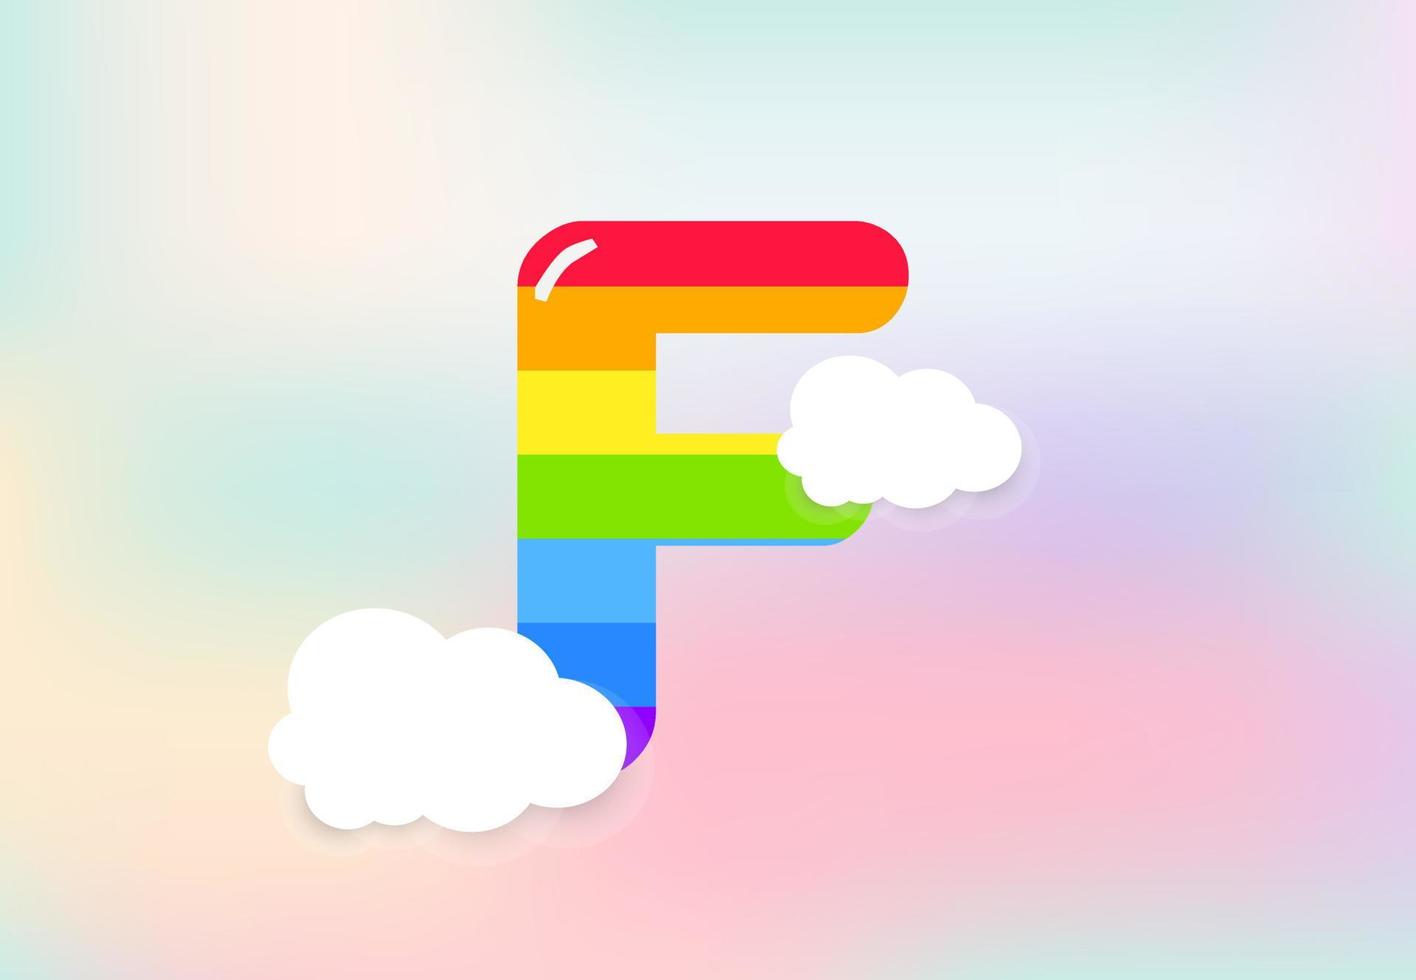 F Letter Rainbow patterns design, abstract rainbow letter for kids, love, family and scholl concept vector illustration design